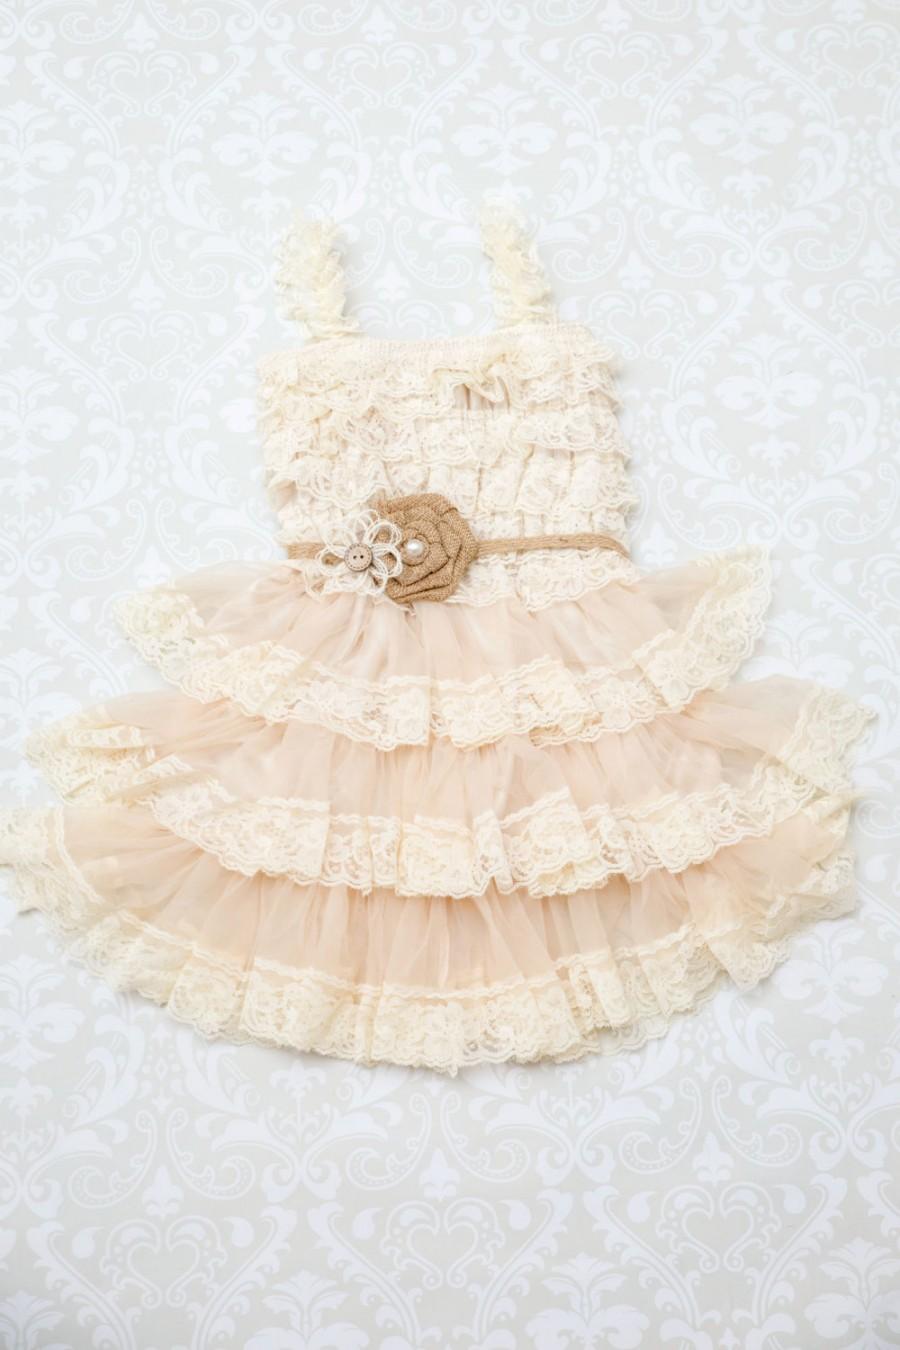 Mariage - Burlap Girls Dress, Rustic Flower Girl Dress, Farm Birthday Outfit, Country Baby Dress, Rustic Dress, Summer Dress, Chic Baby Dress